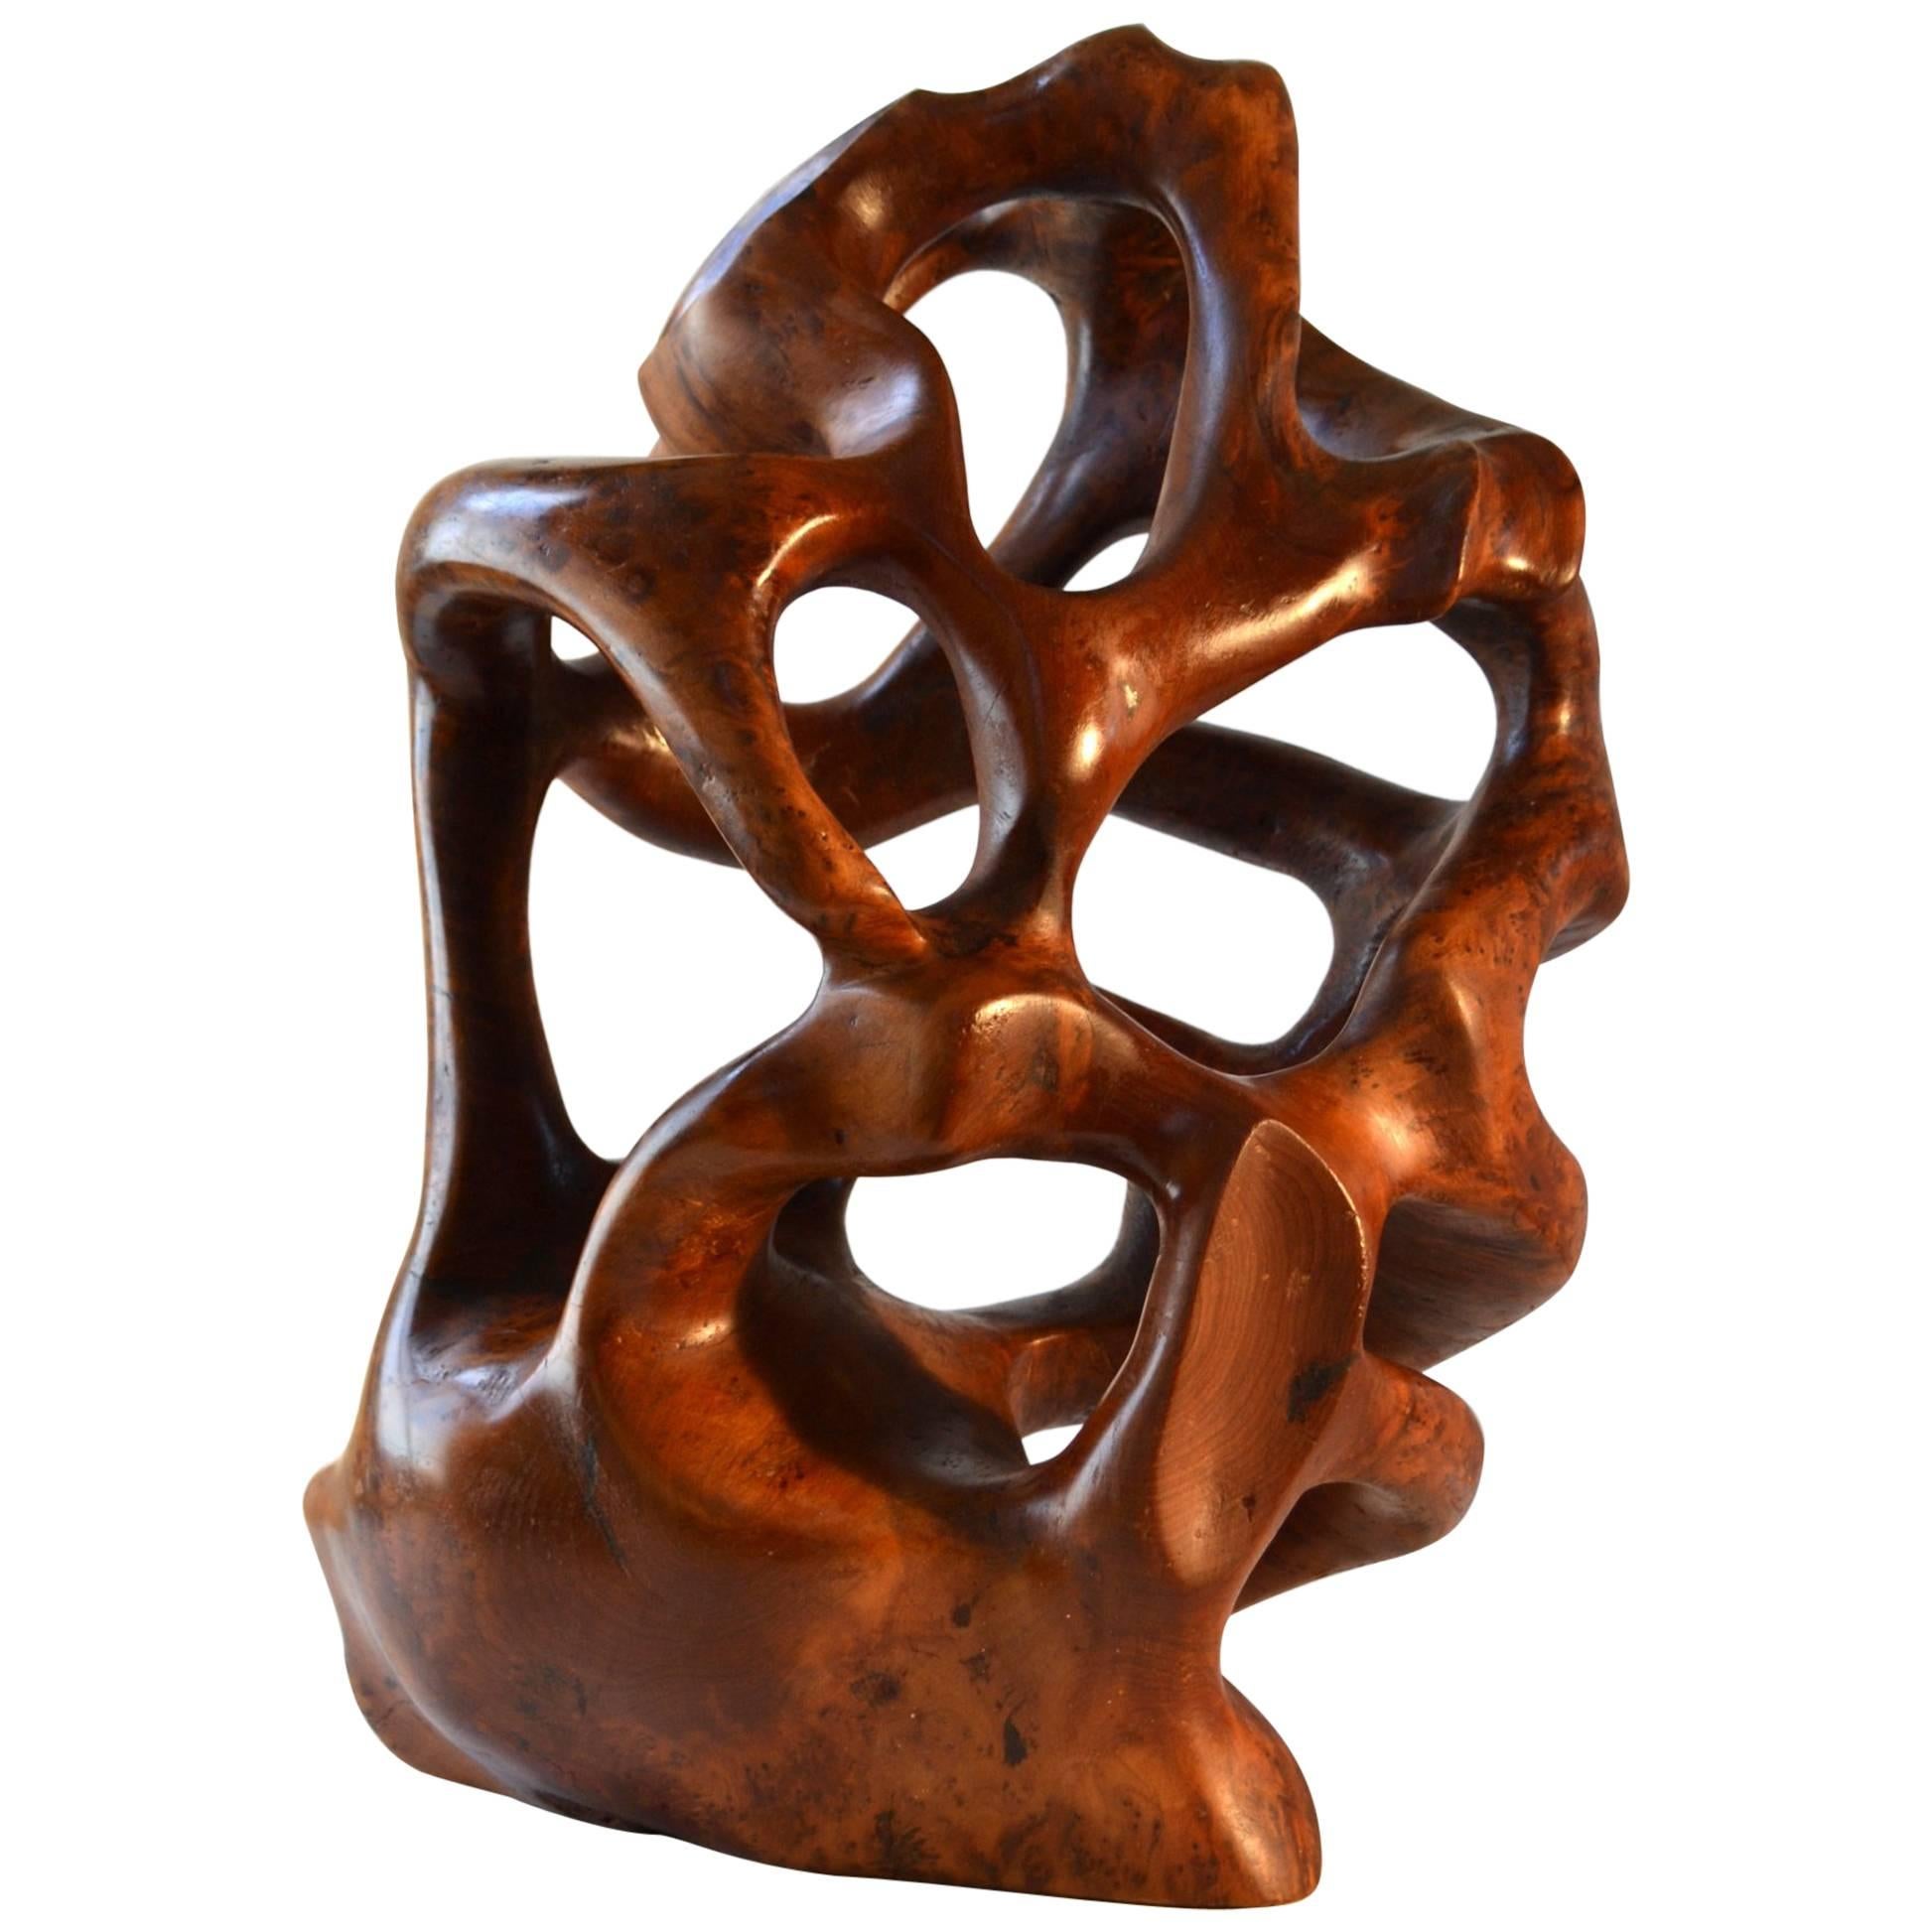 Large 1970s Abstract Organic Sculpture Hand-Carved in Yew